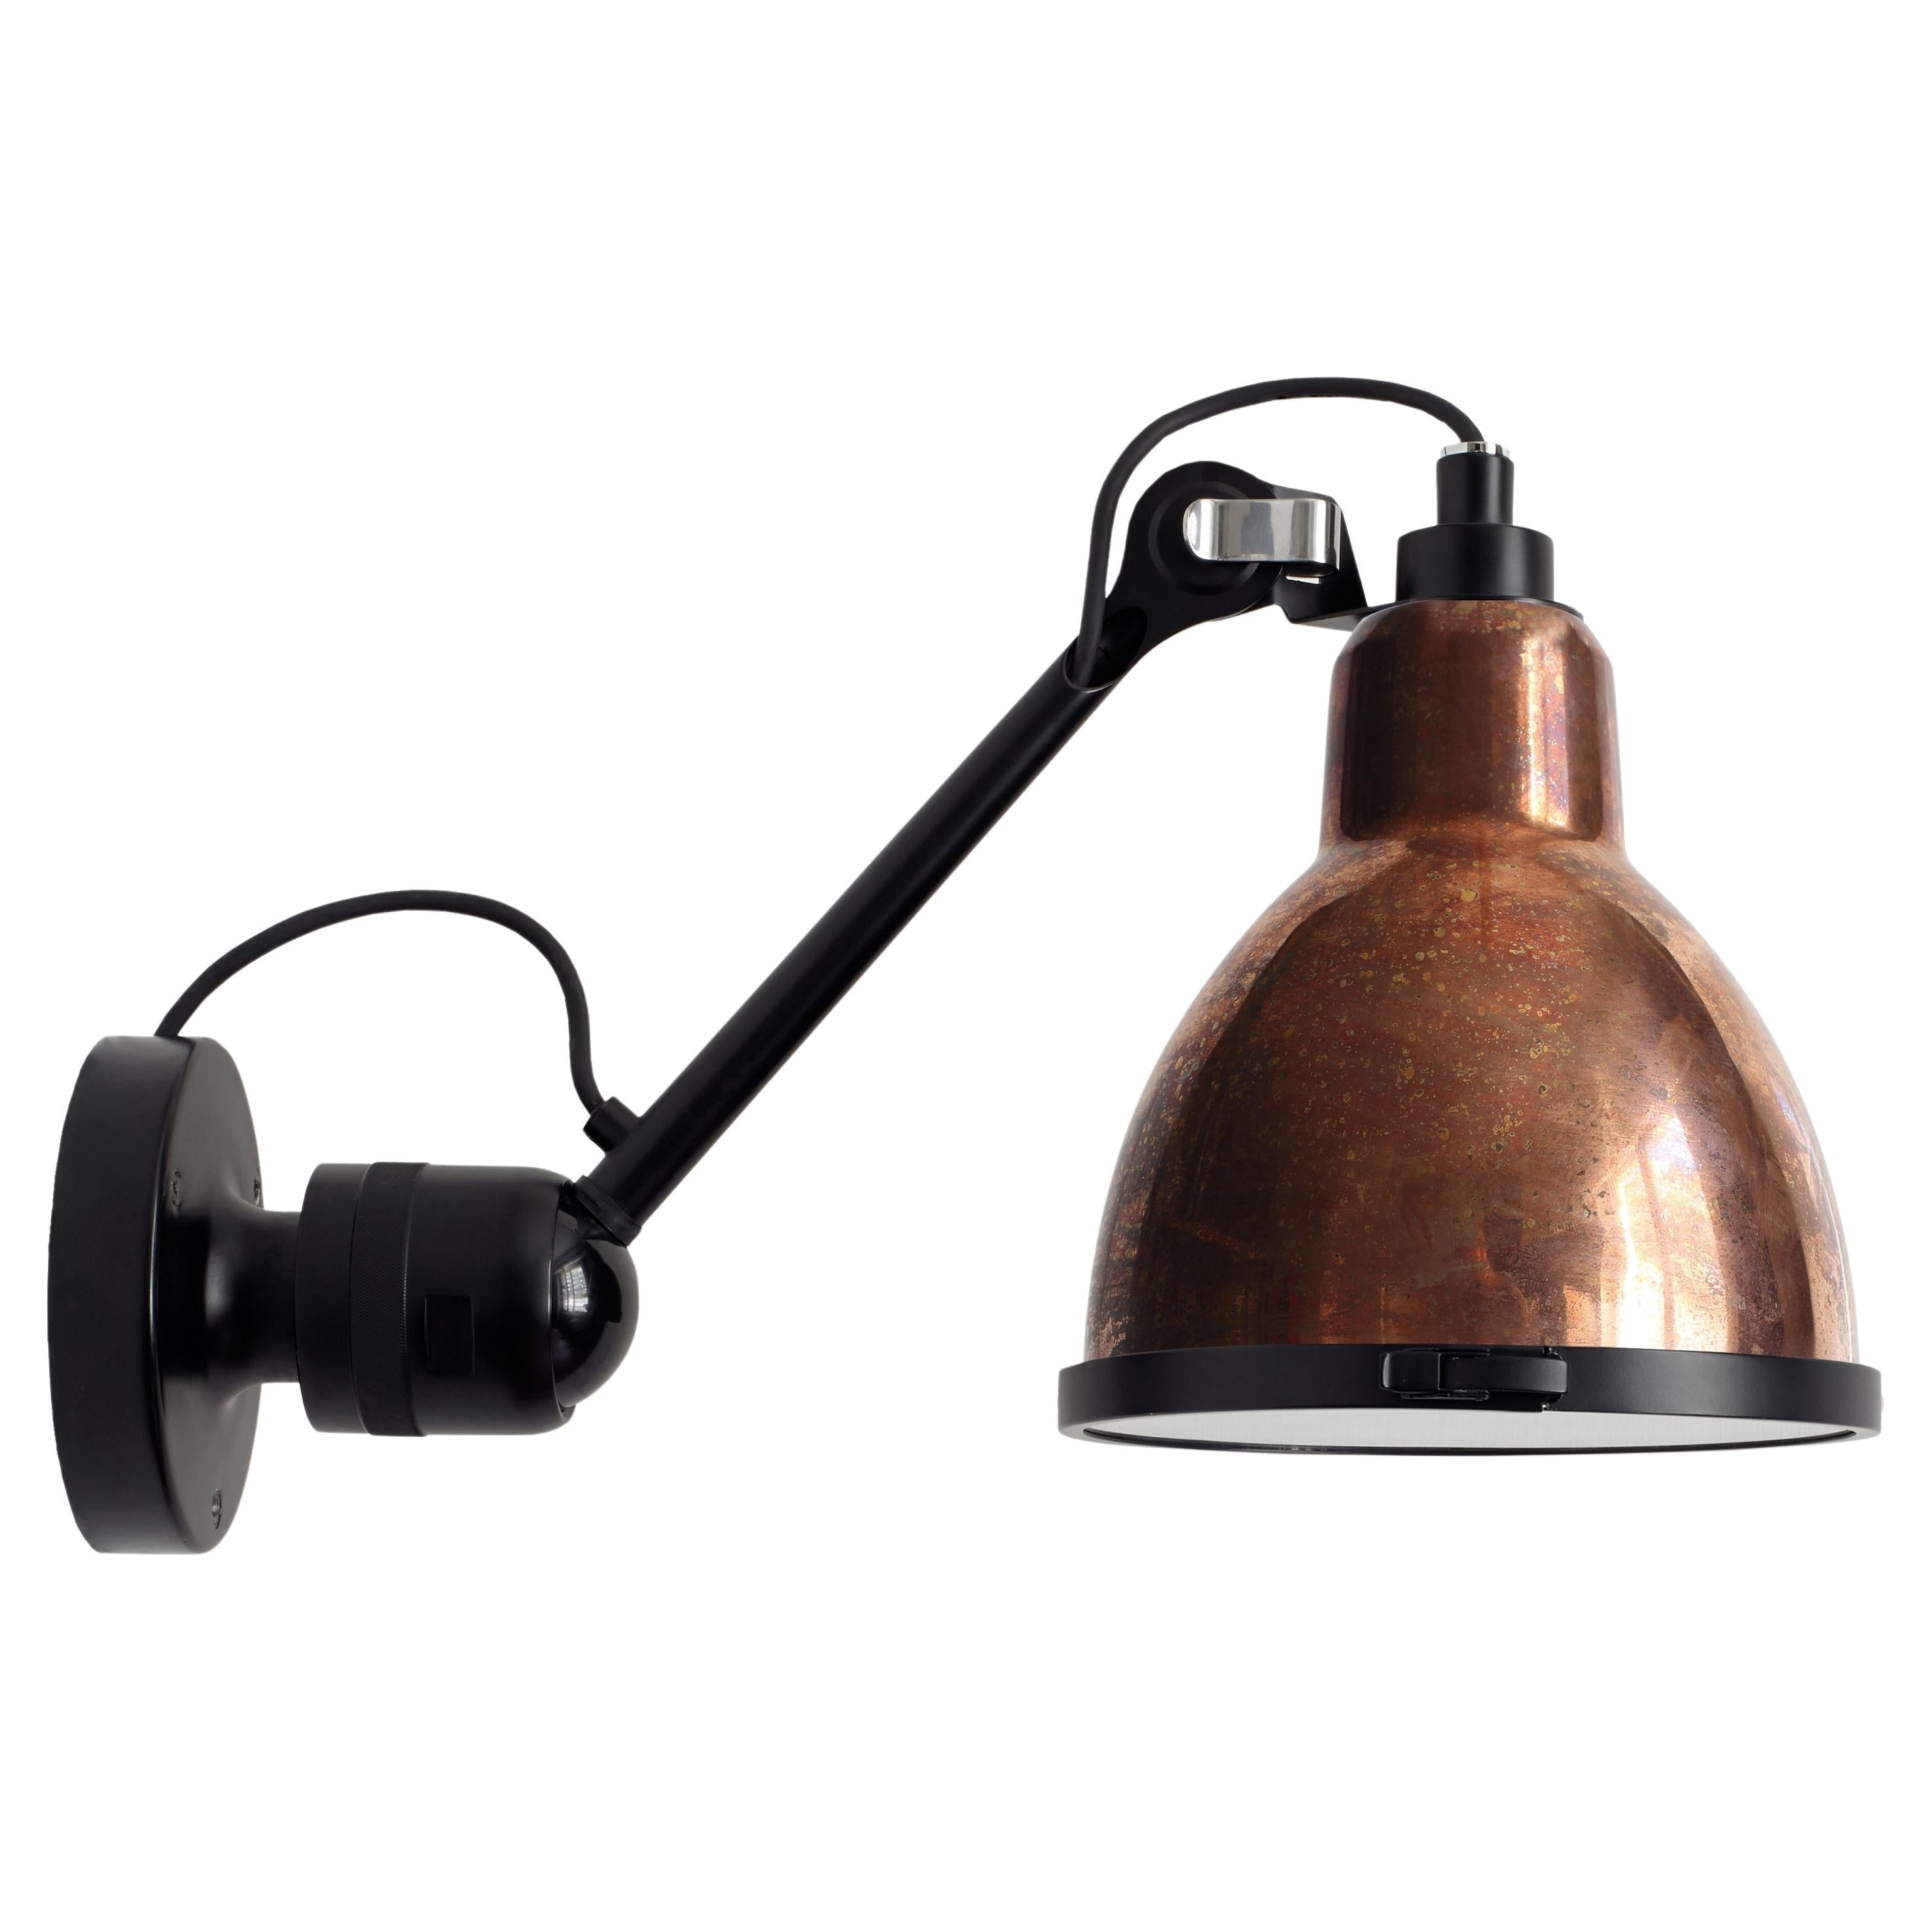 DCW Editions La Lampe Gras N°304 XL Round Wall Lamp in Raw Copper Shade